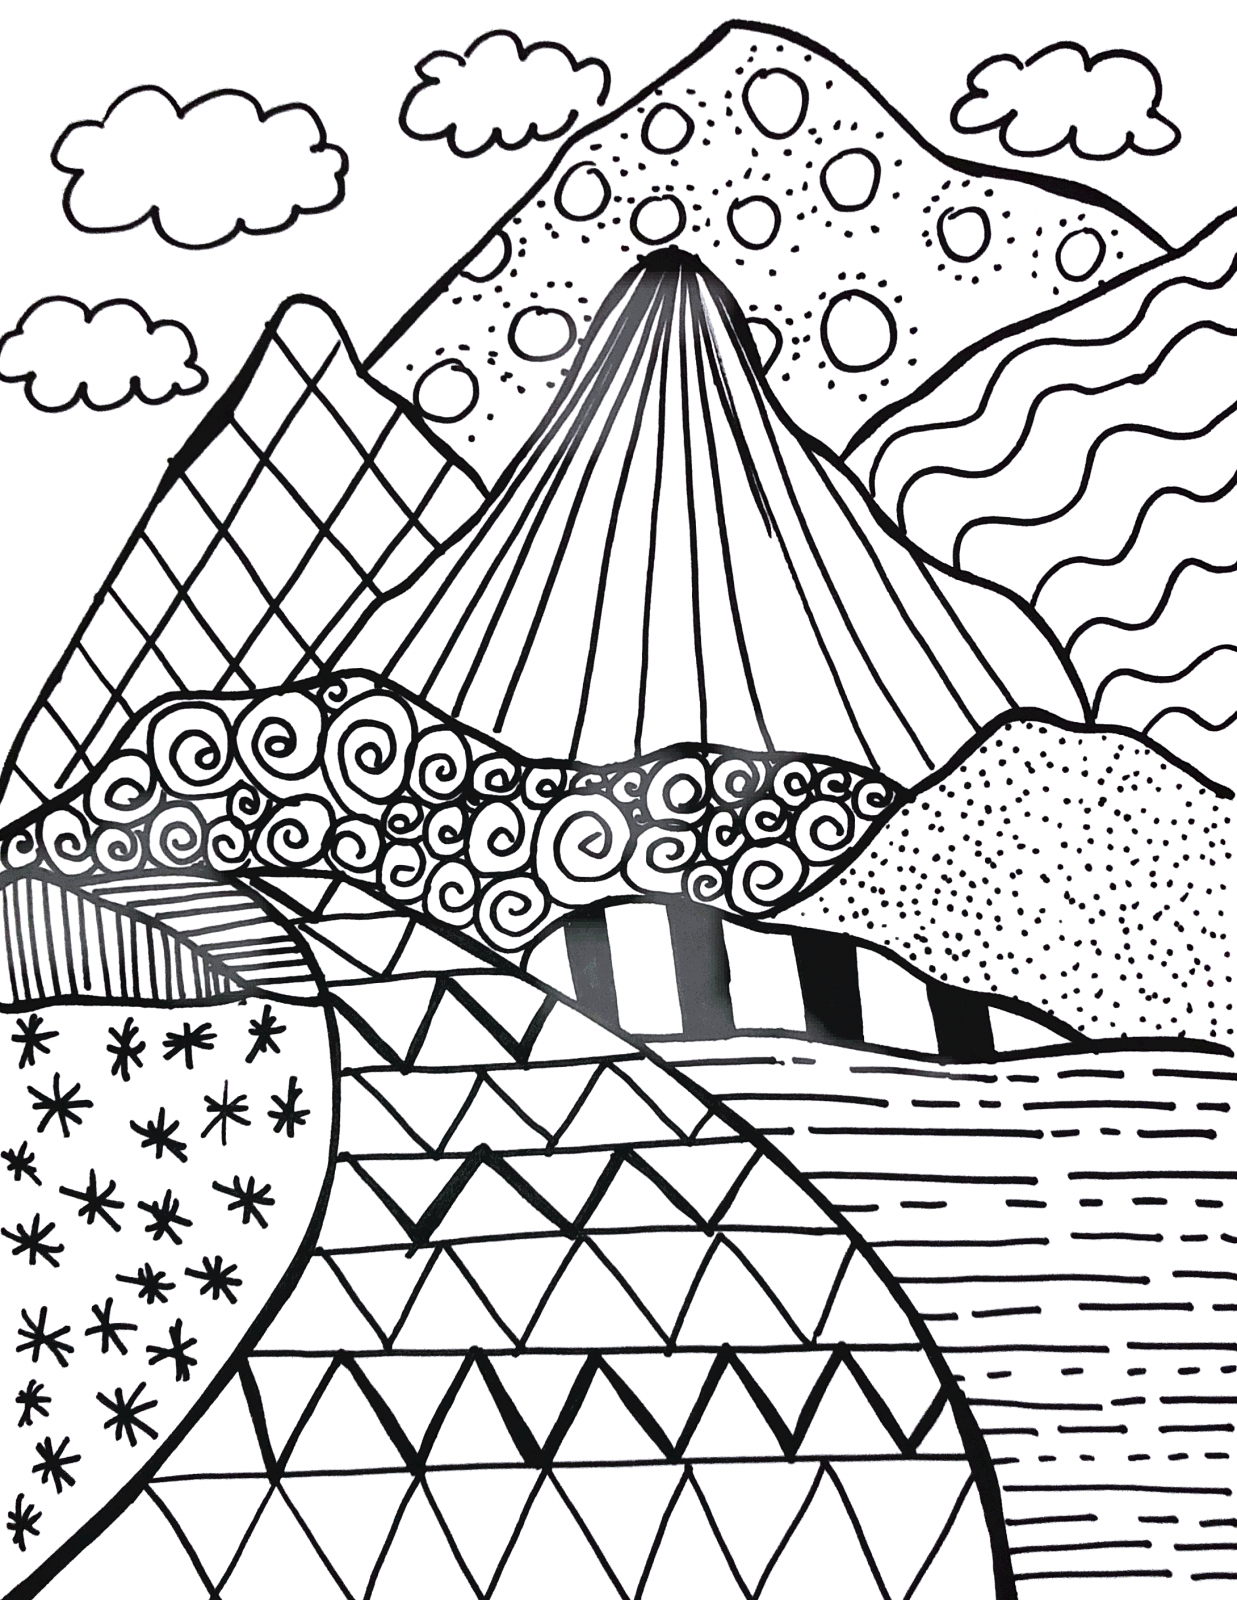 Using Zentangle in the Classroom: What it is, Why it Works